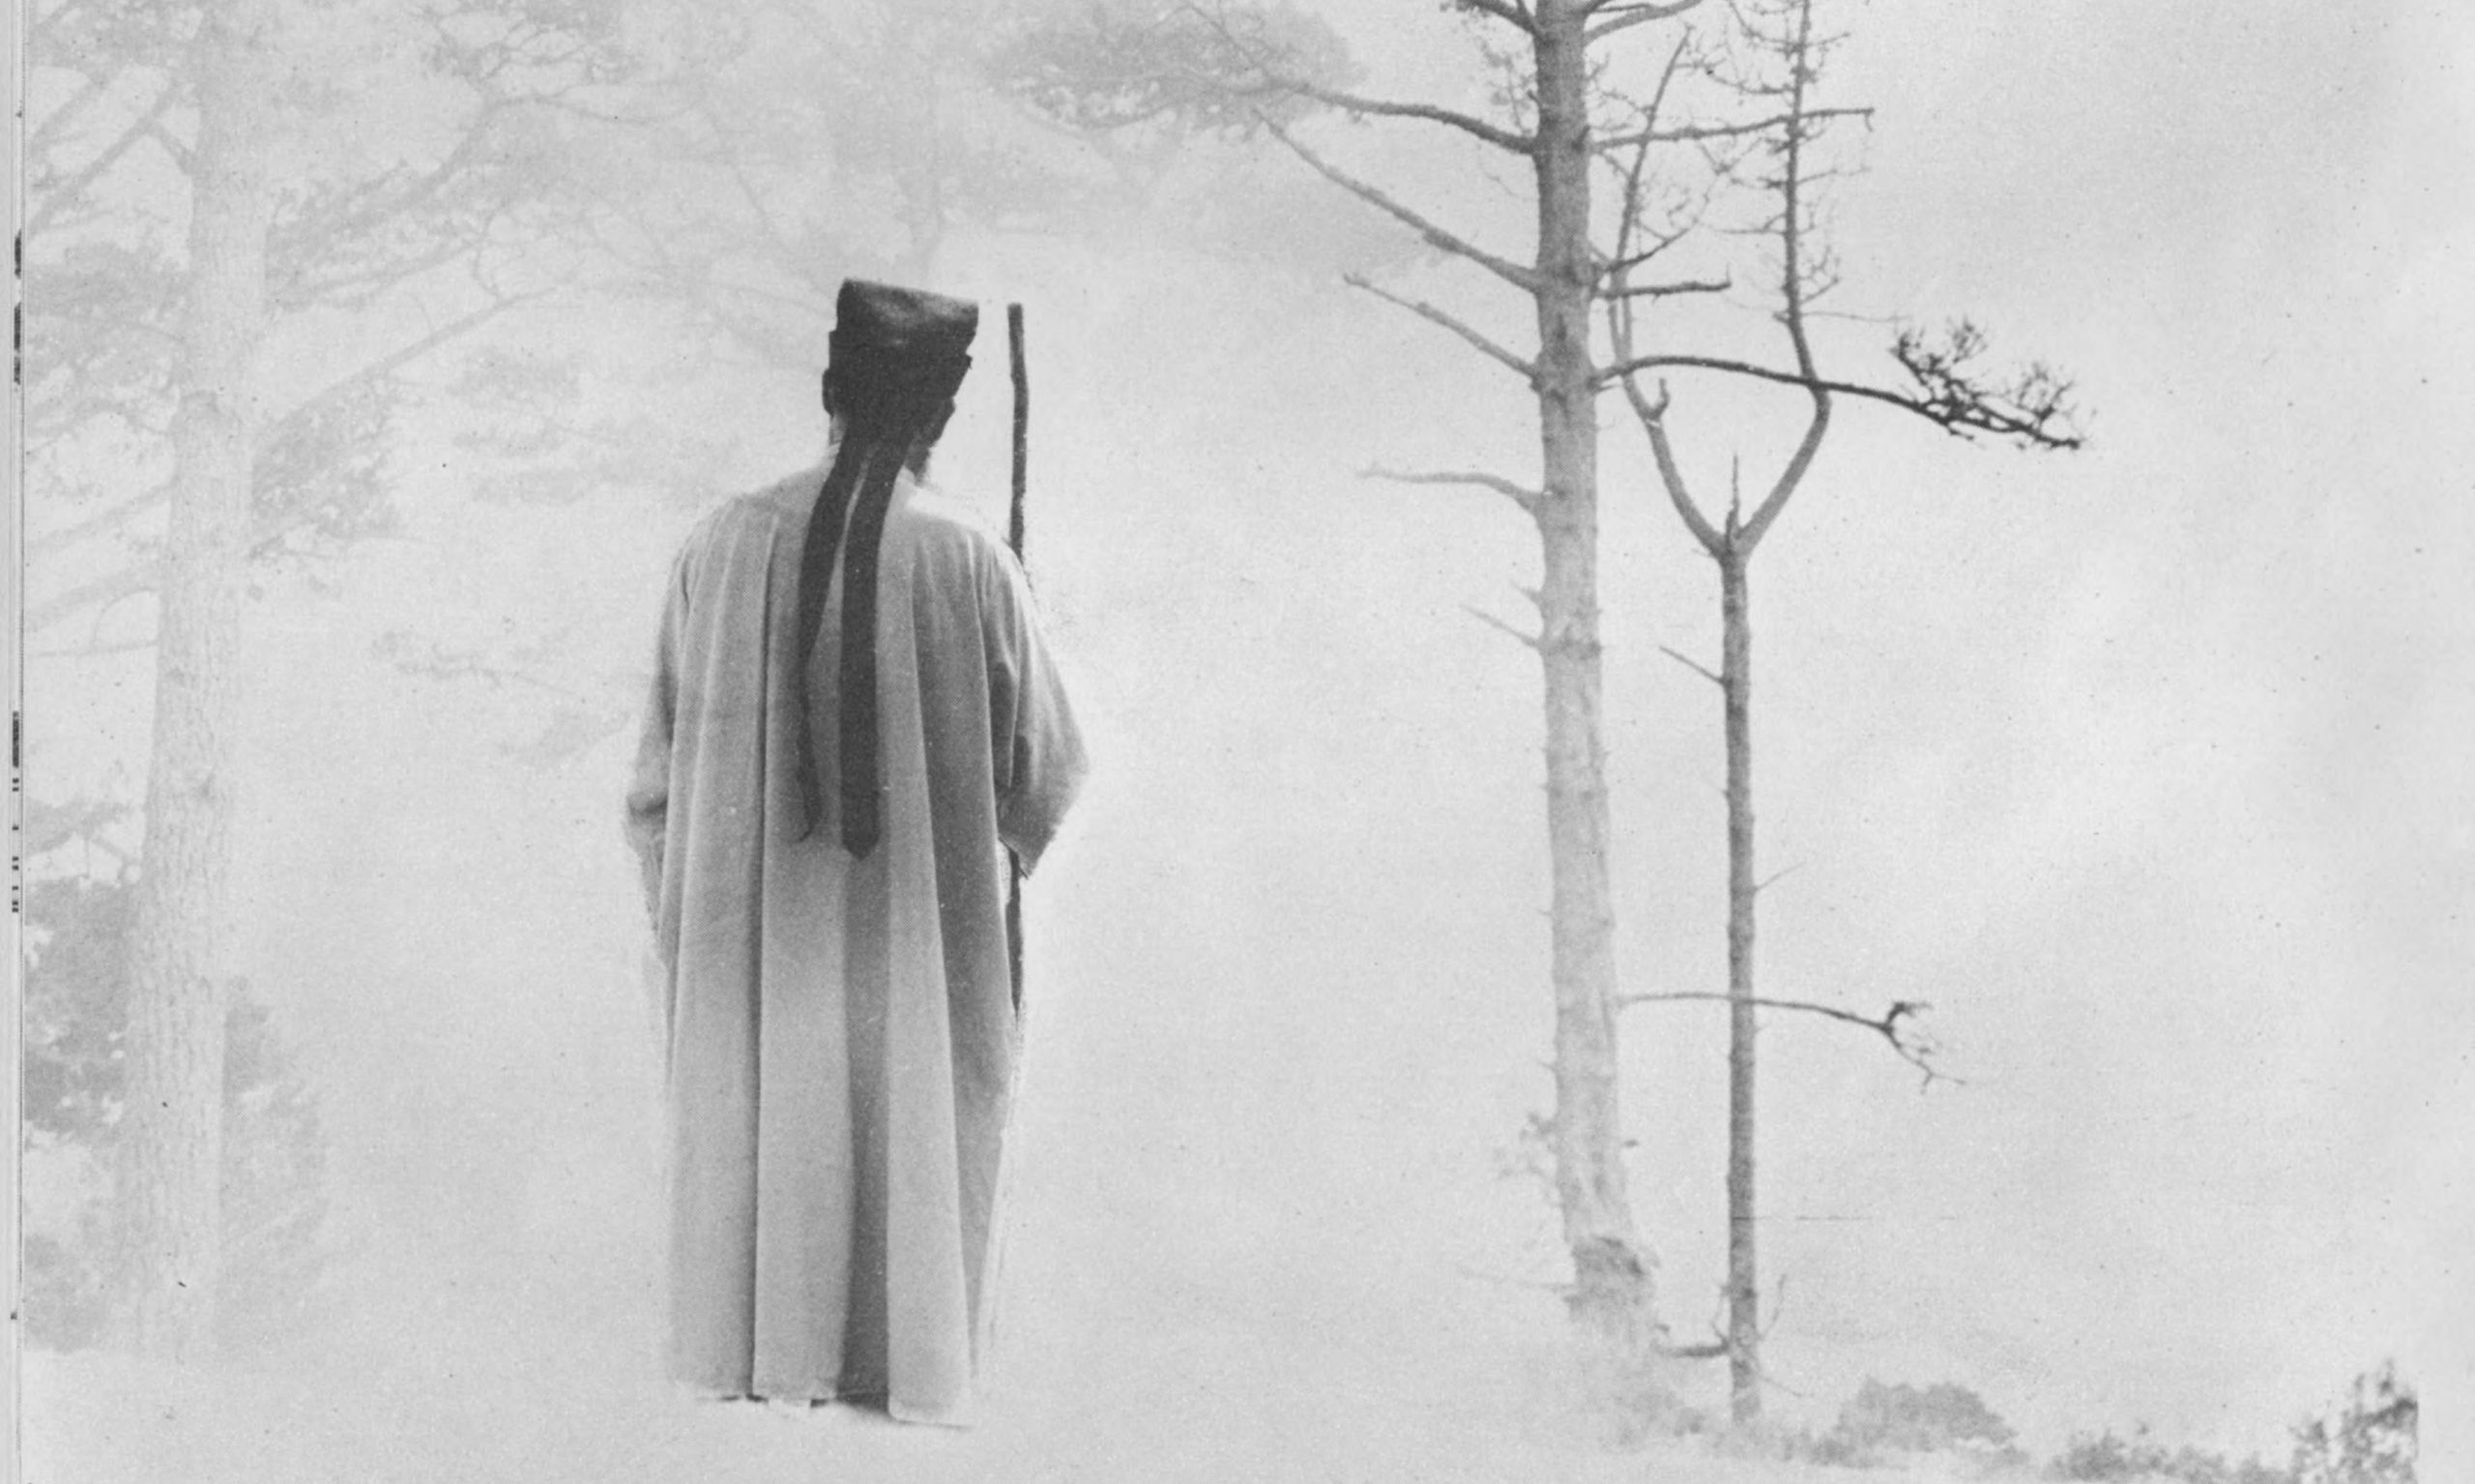 n some photographs, Zhang is placed into a misty landscape. Lang Jingshan, Qinchen ru yunwu (Entering the Mist in Morning), composite photograph reproduced in Badeyuan shejing (U-M Library Digital Collections. Trans-Asia Photography Review Images)